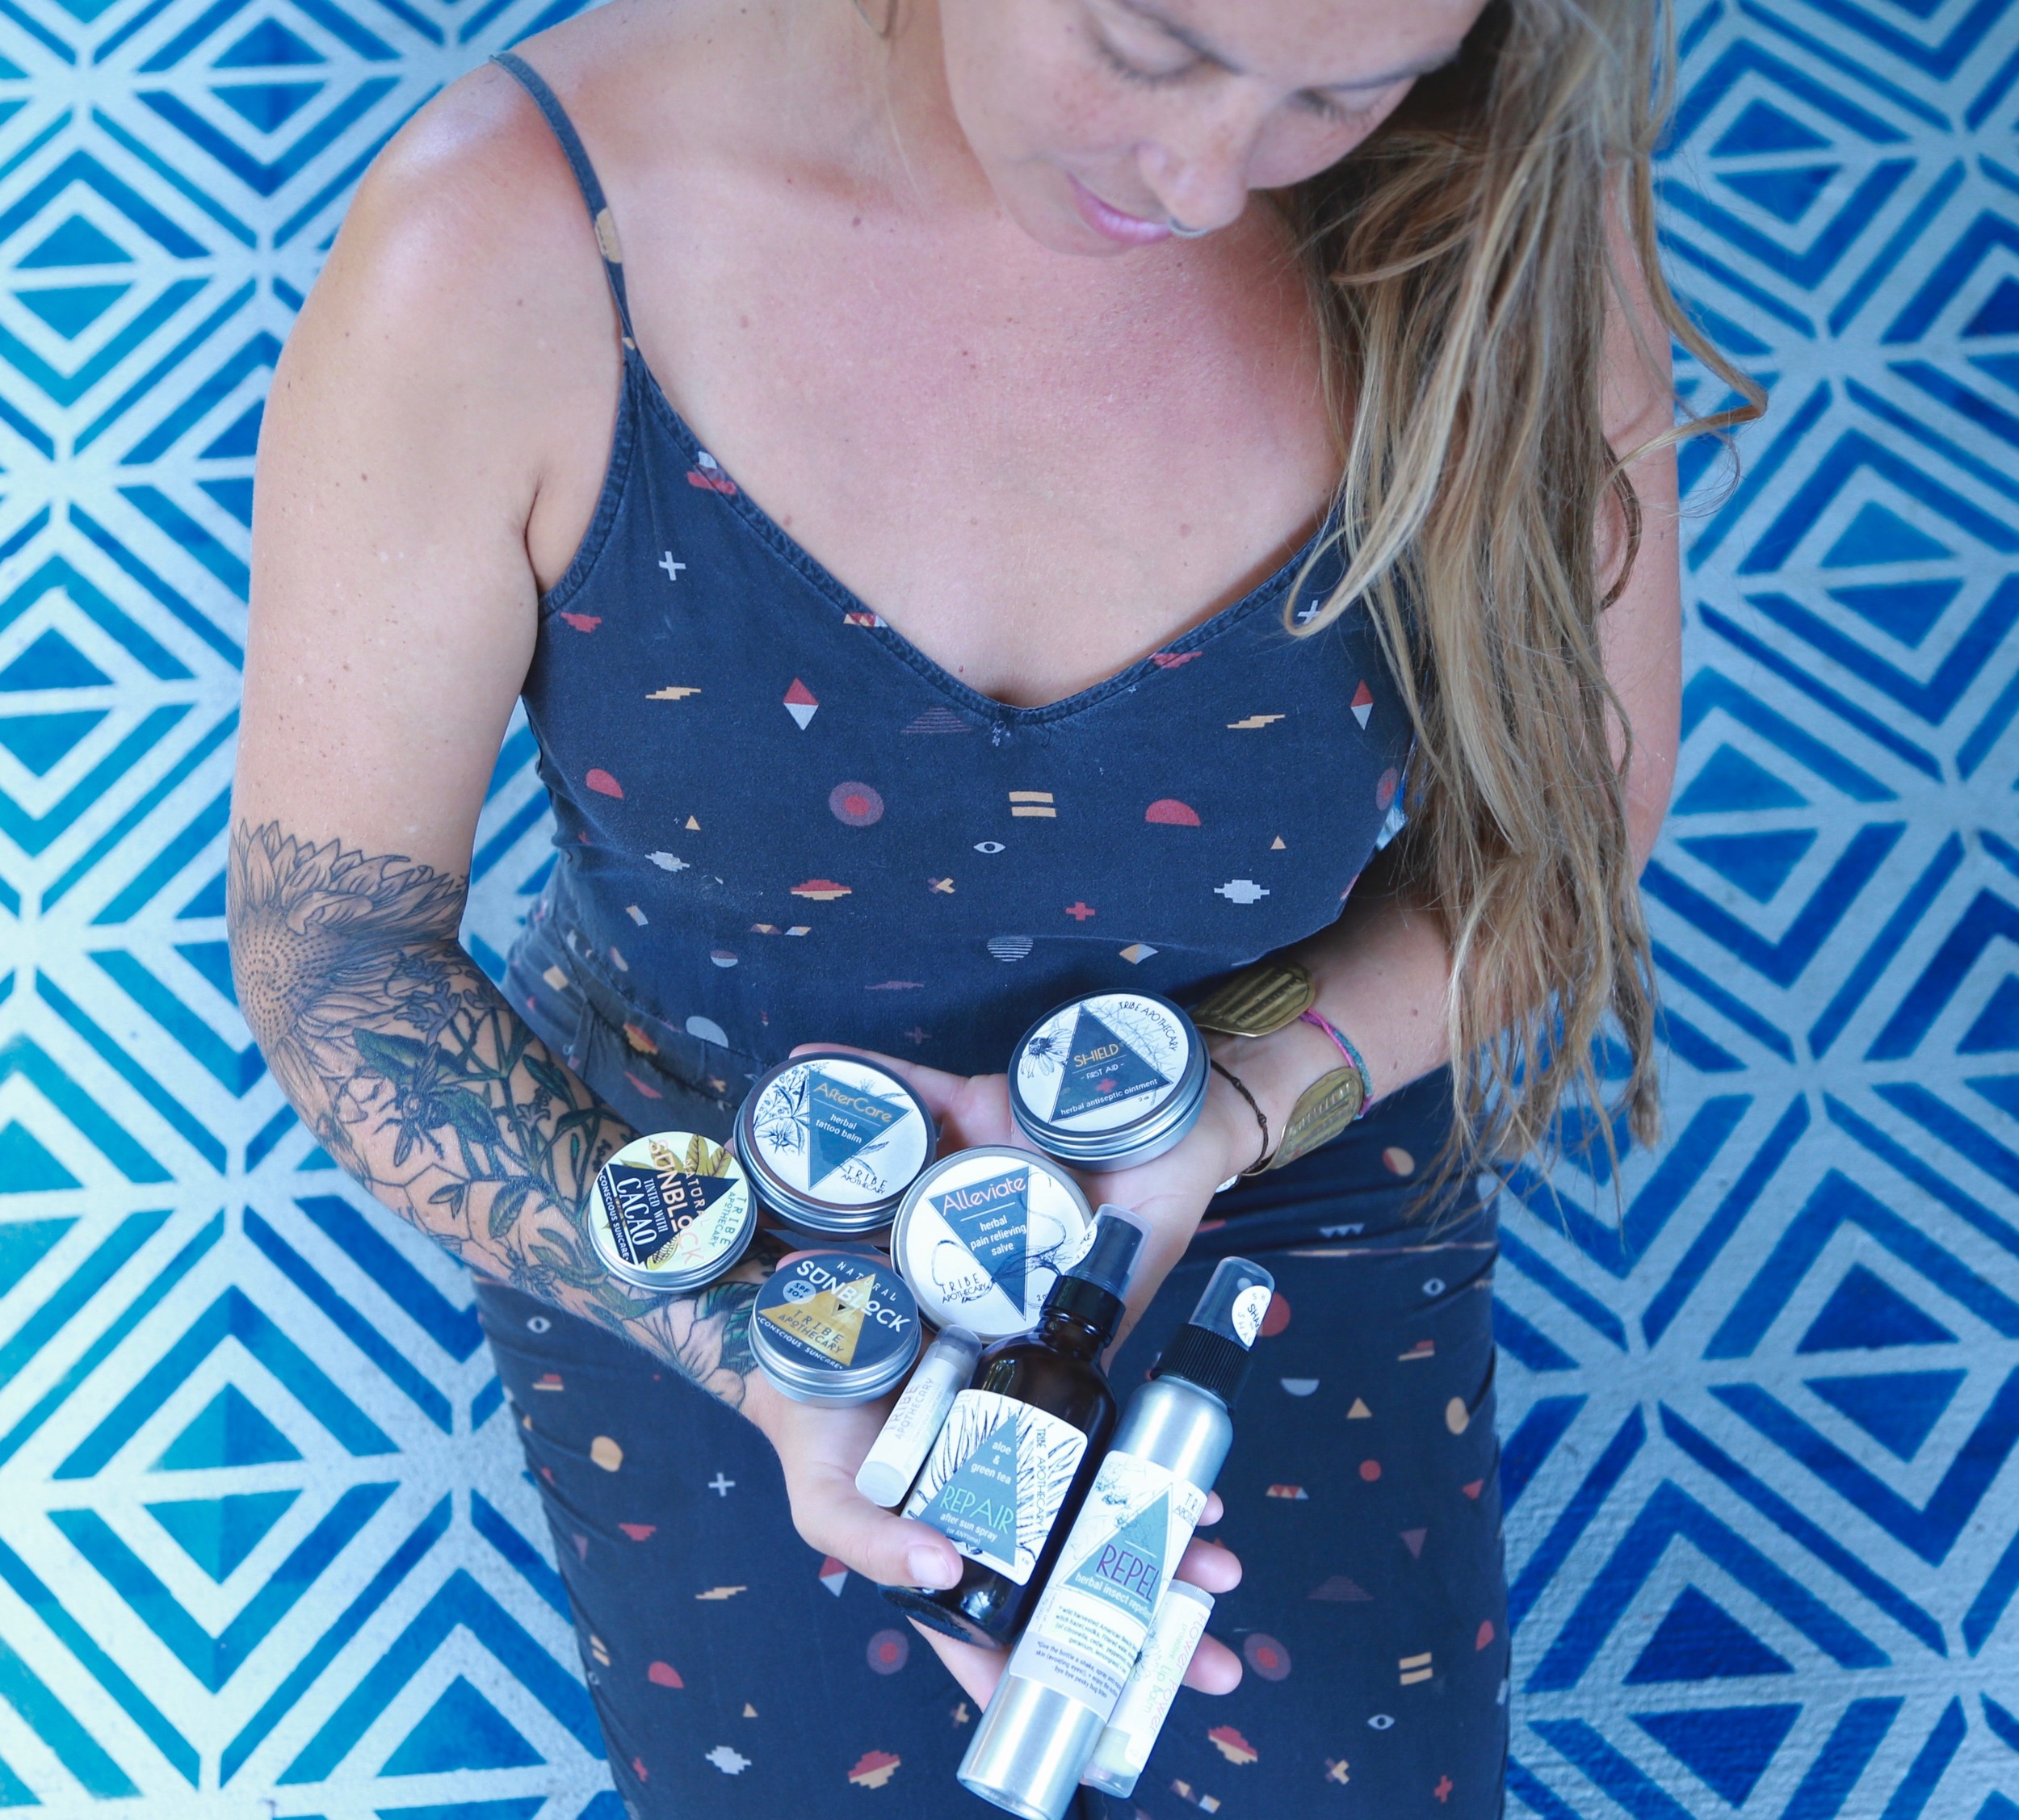 Tribe Apothecary owner Lauren Estes displays the various sunscreen and skin care products that her business sells.